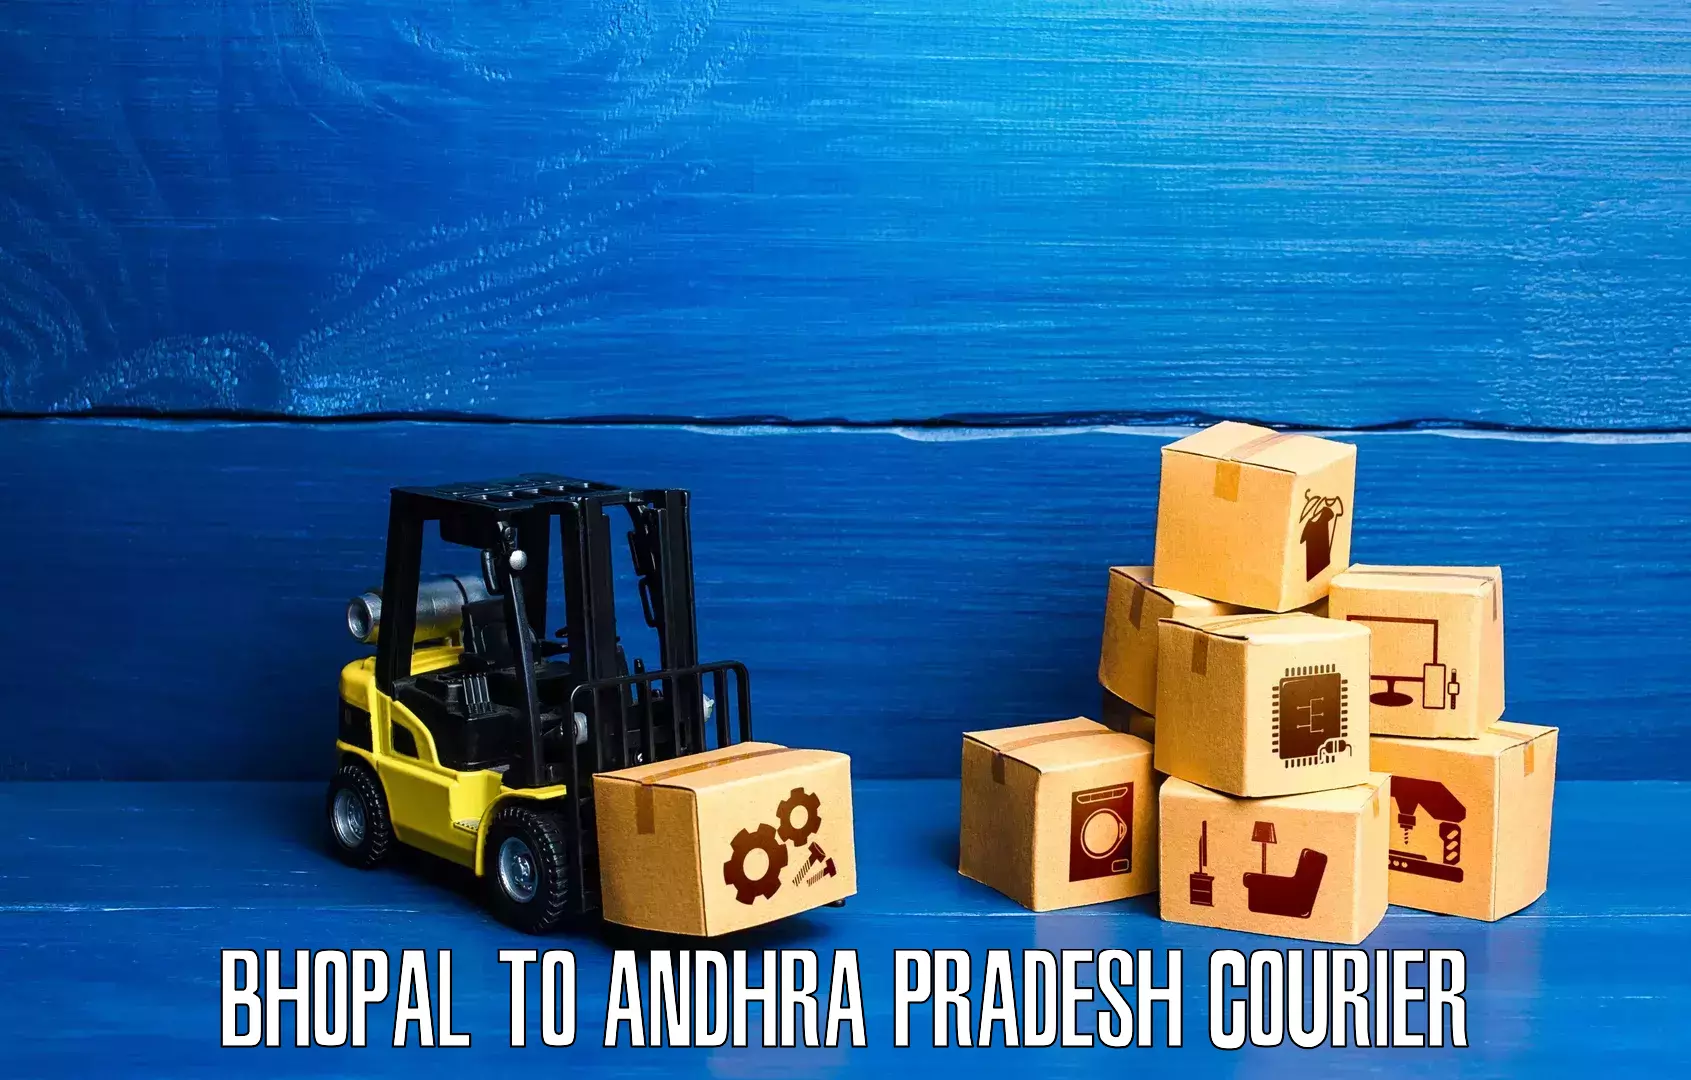 Package delivery network Bhopal to Chodavaram